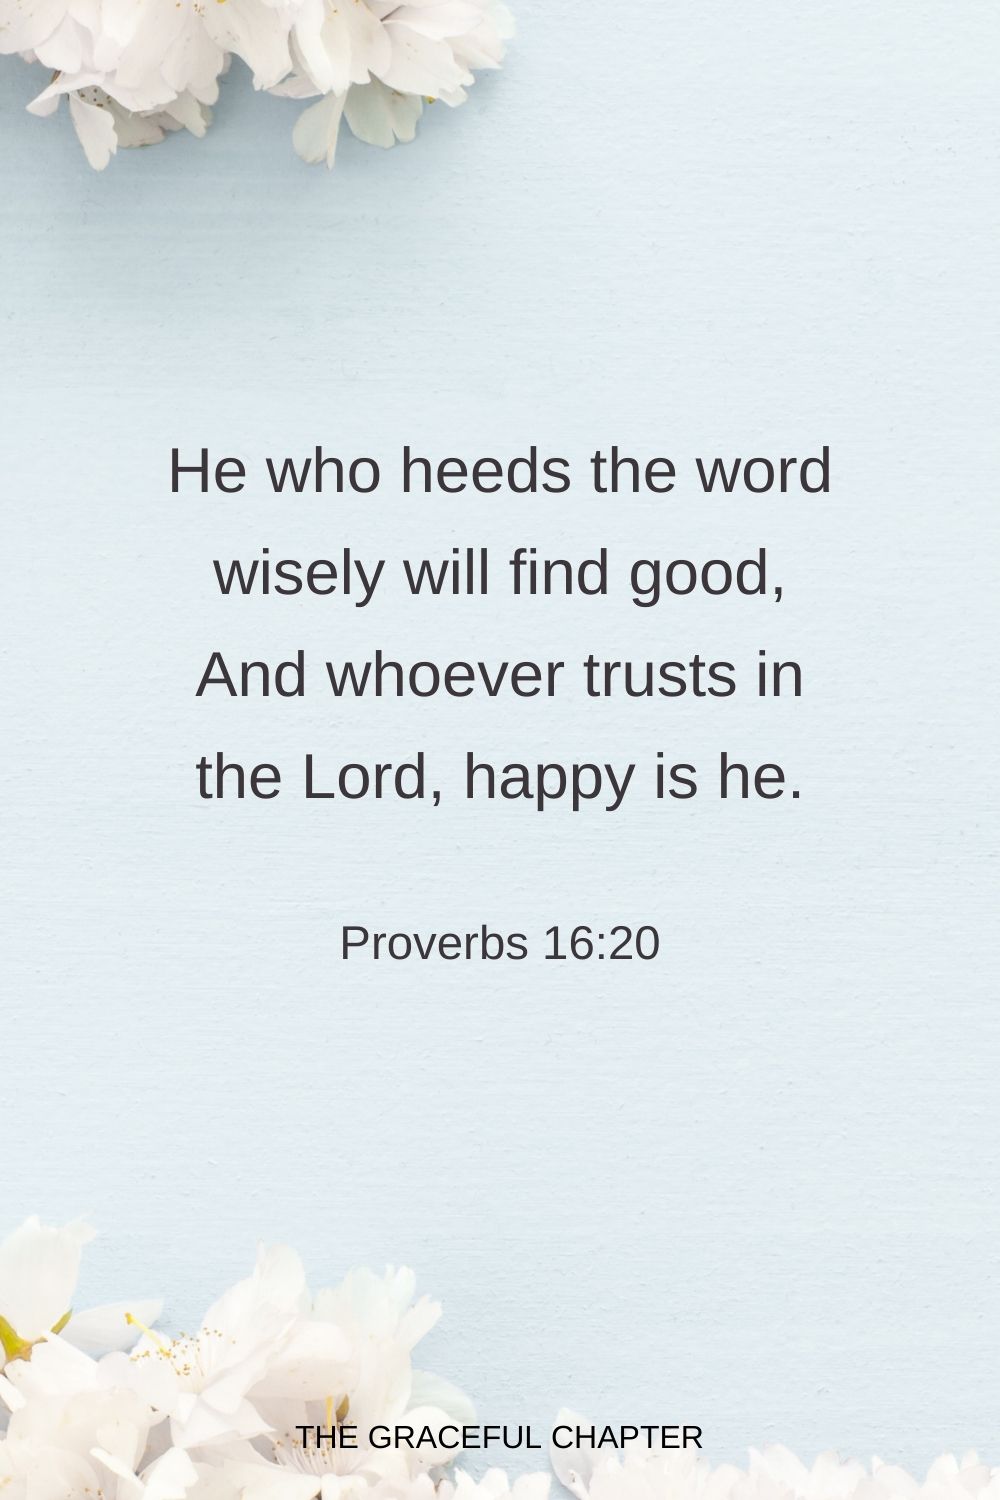 He who heeds the word wisely will find good, And whoever trusts in the Lord, happy is he. Proverbs 16:20